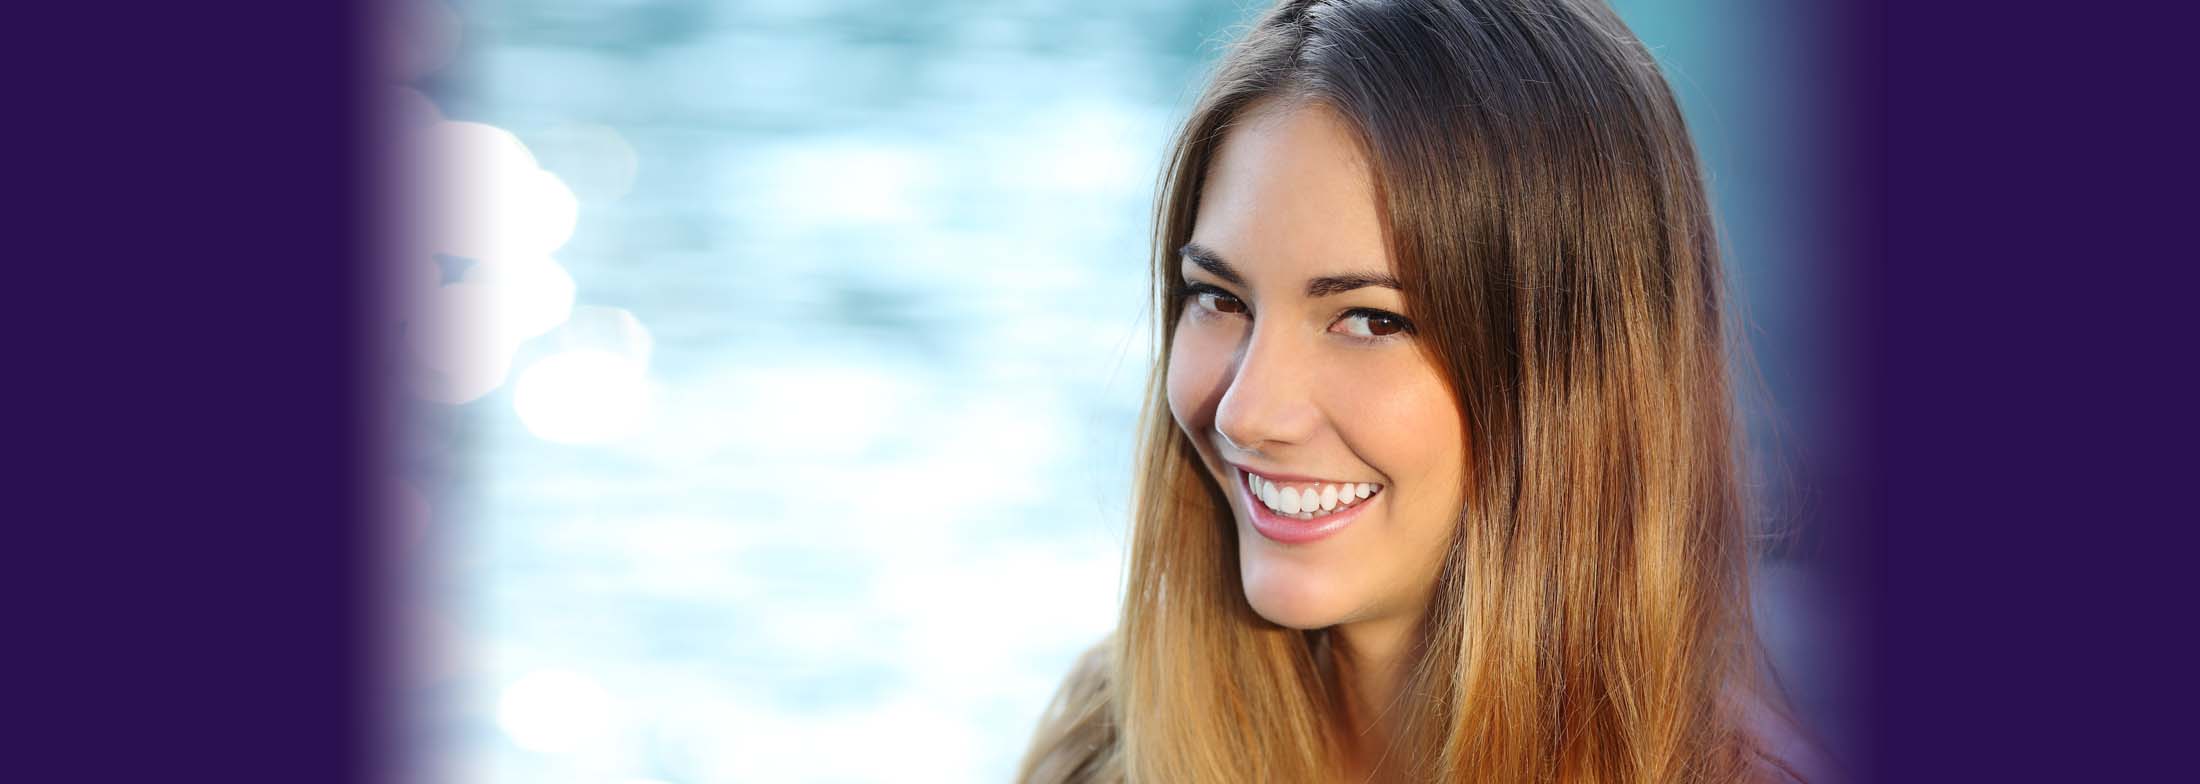 Header image of a woman smiling with a lake in the background